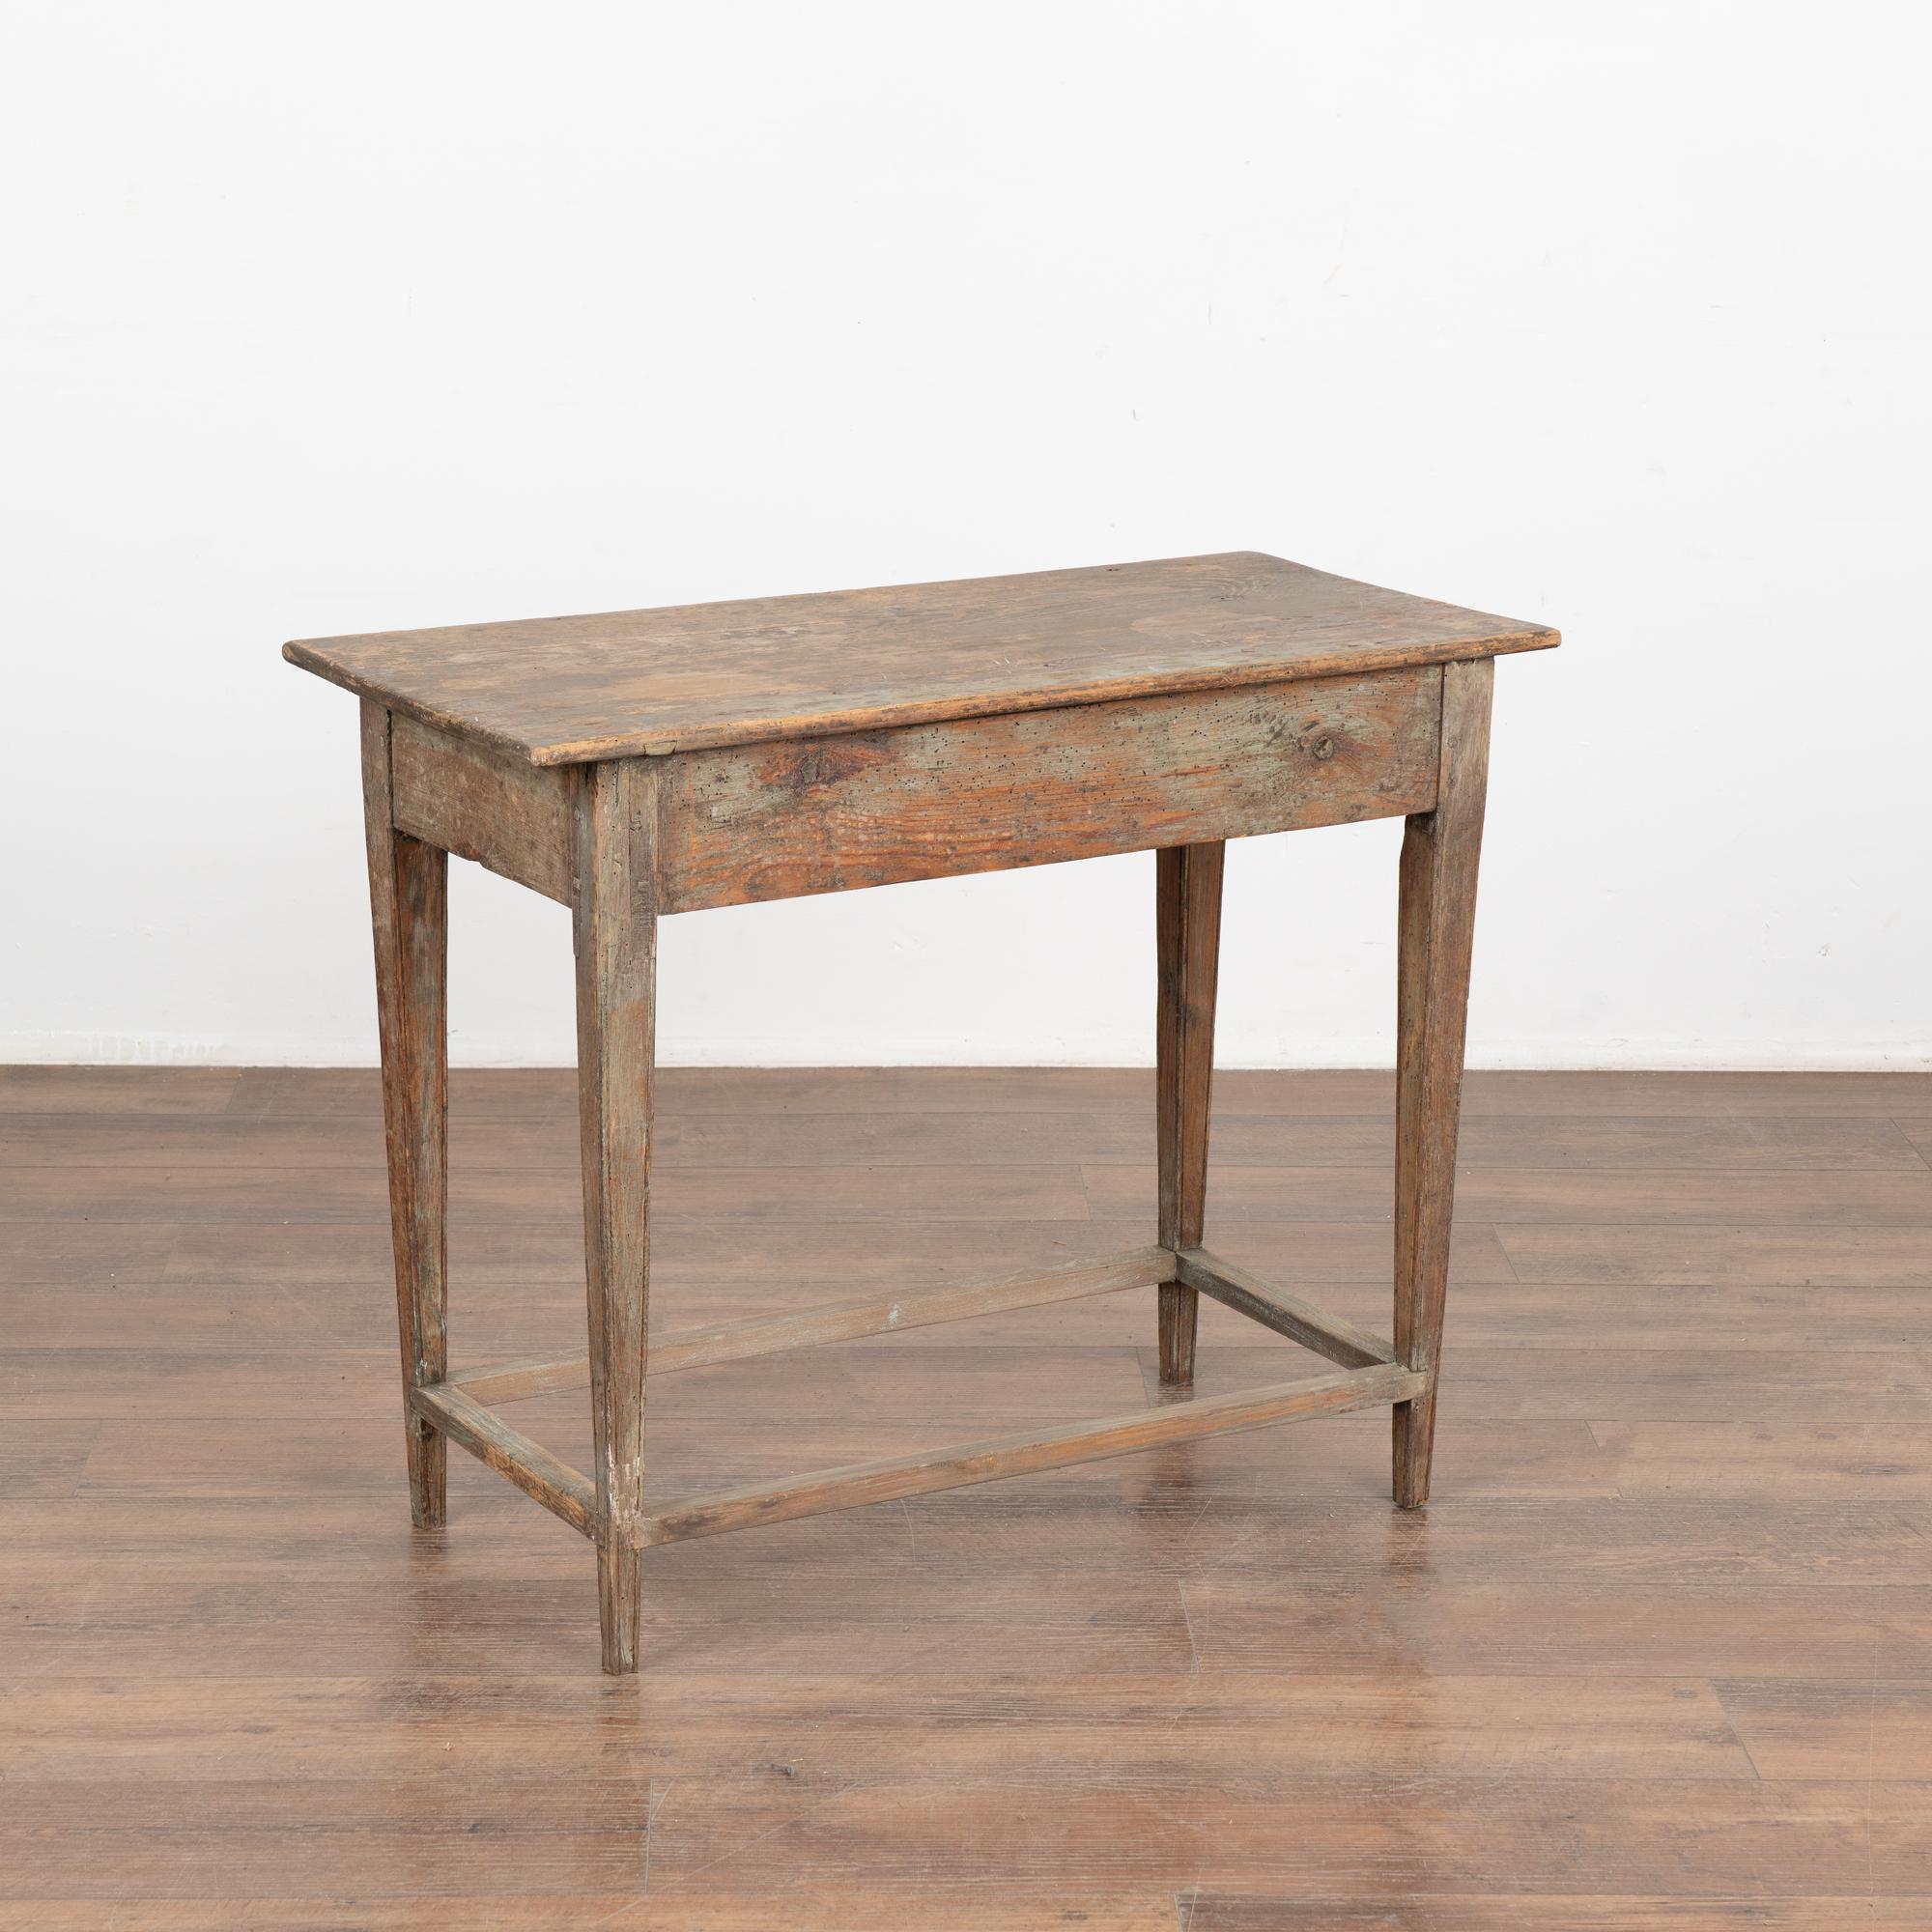 Original Painted Pine Side Table With Drawer, Sweden circa 1820-40 4